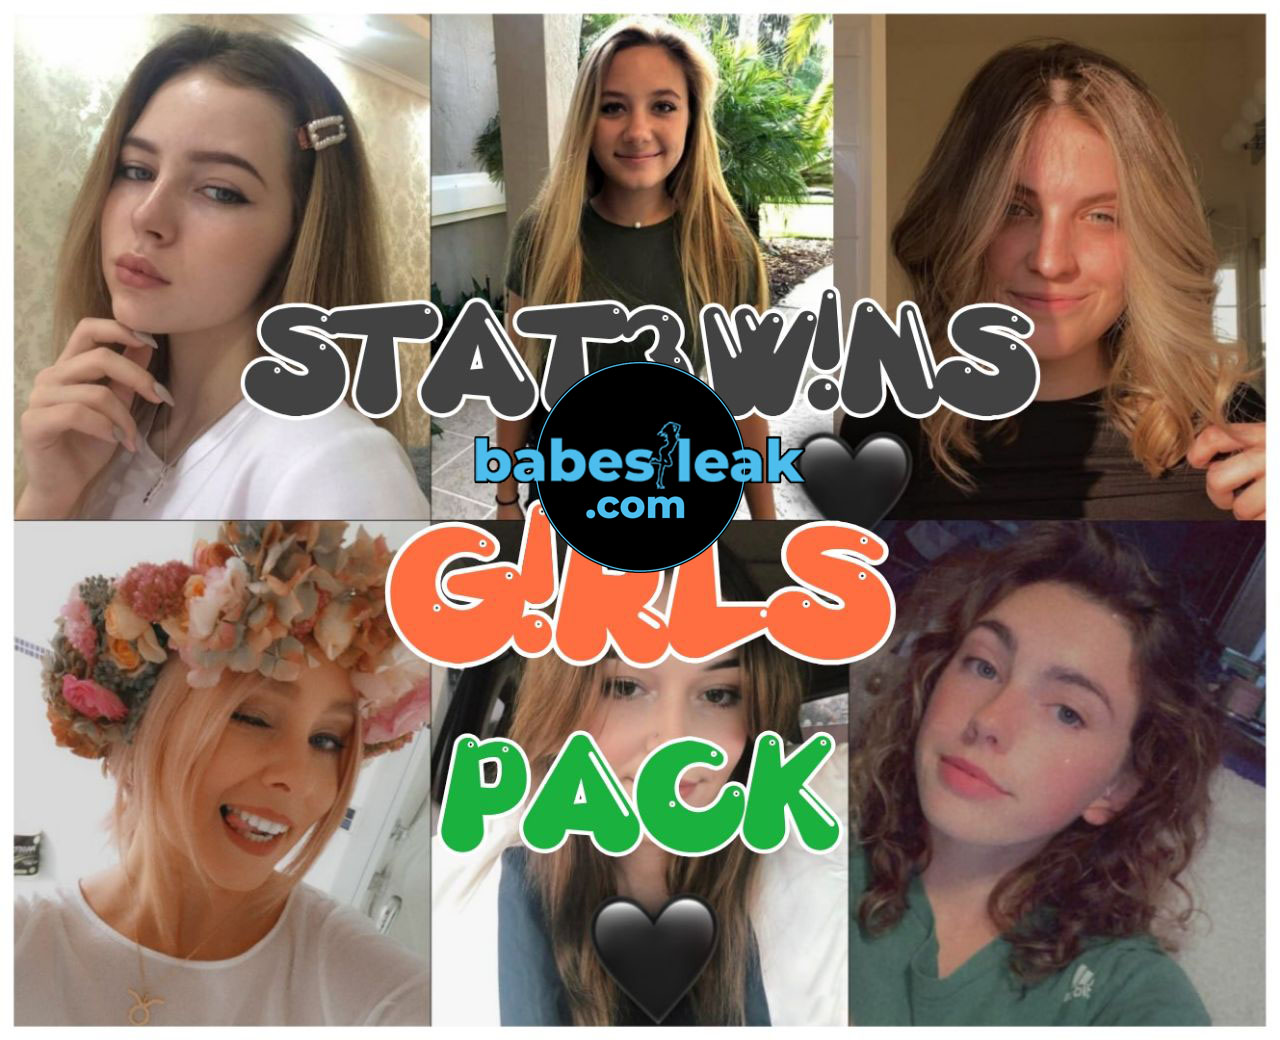 Premium 23 Statewins Girls Pack Stw053 Onlyfans Leaks Snapchat Leaks Statewins Leaks